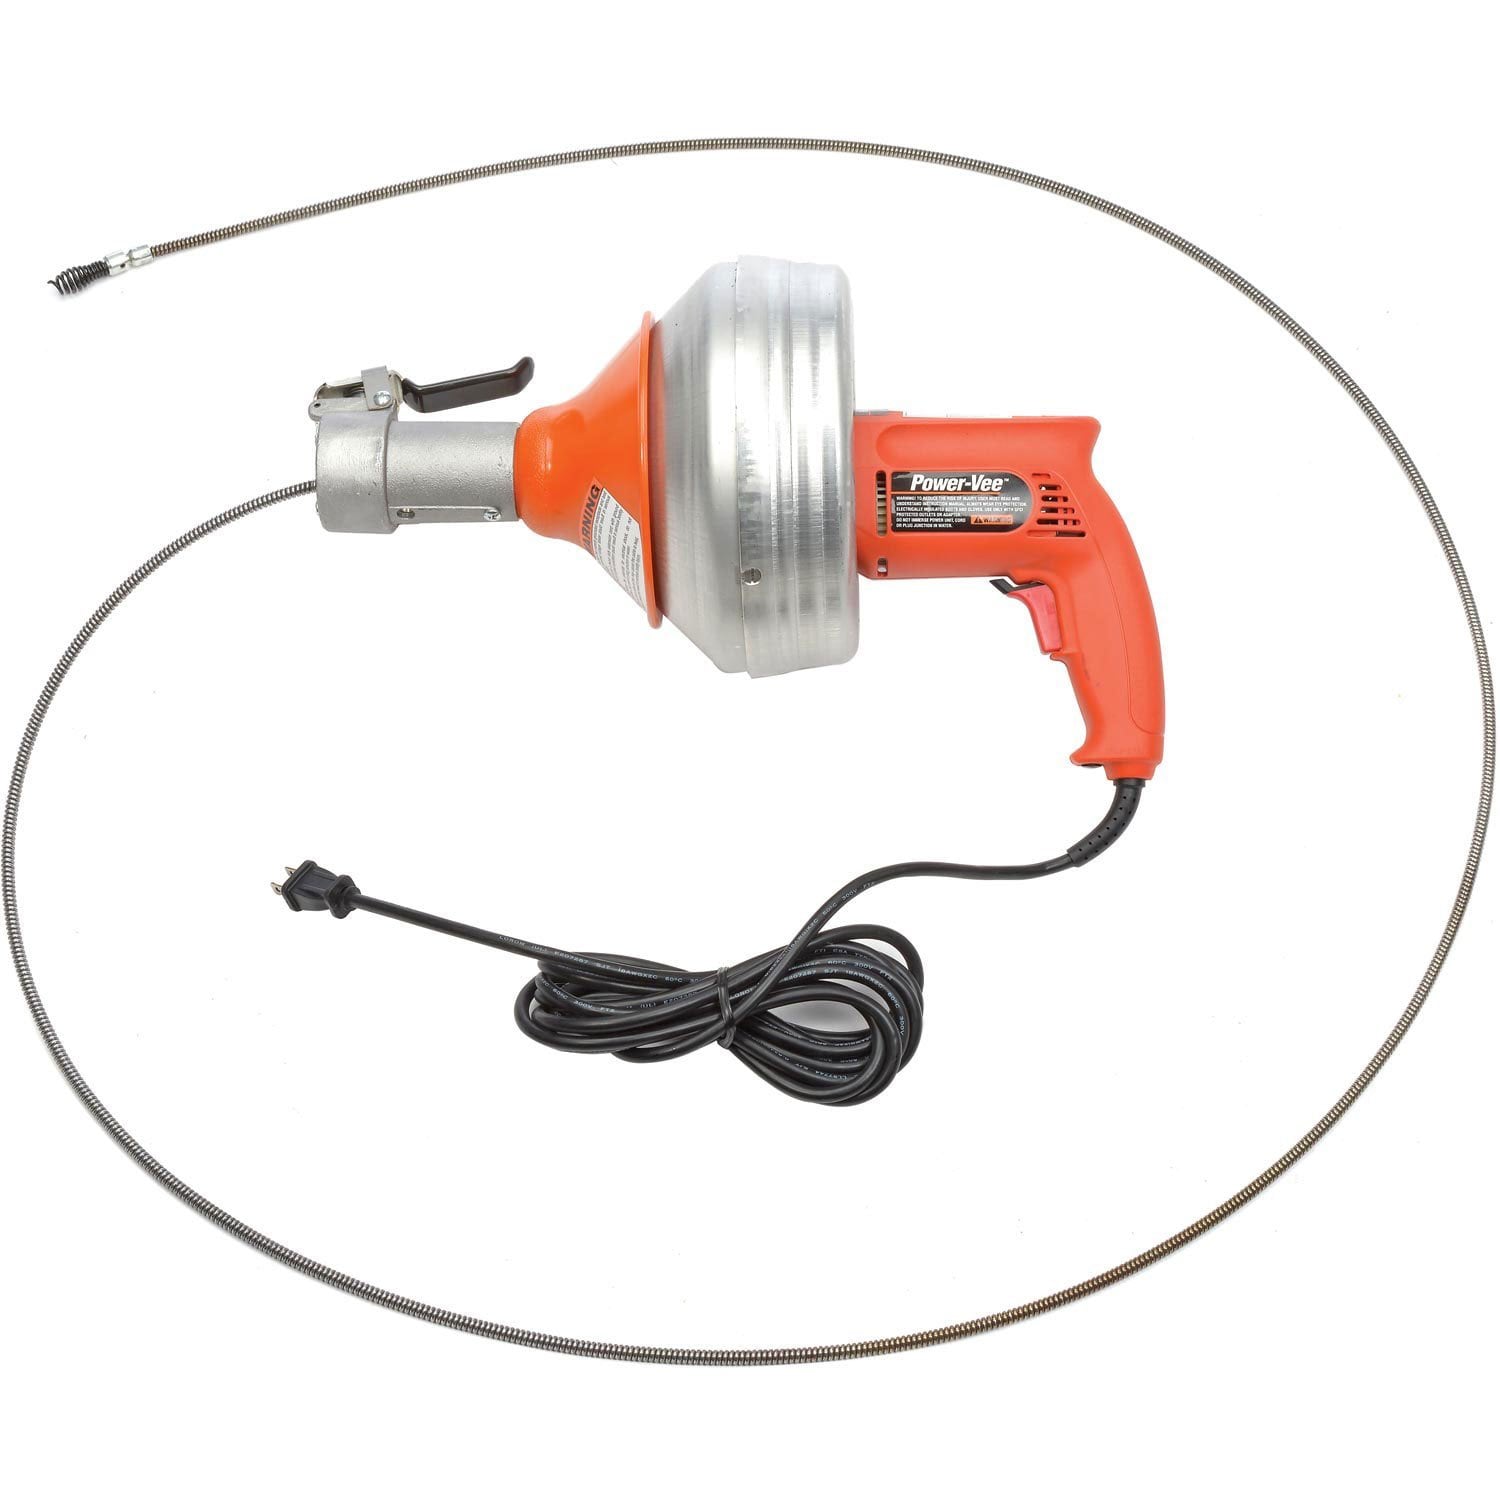 50 Ft. Compact Electric Drain Cleaner